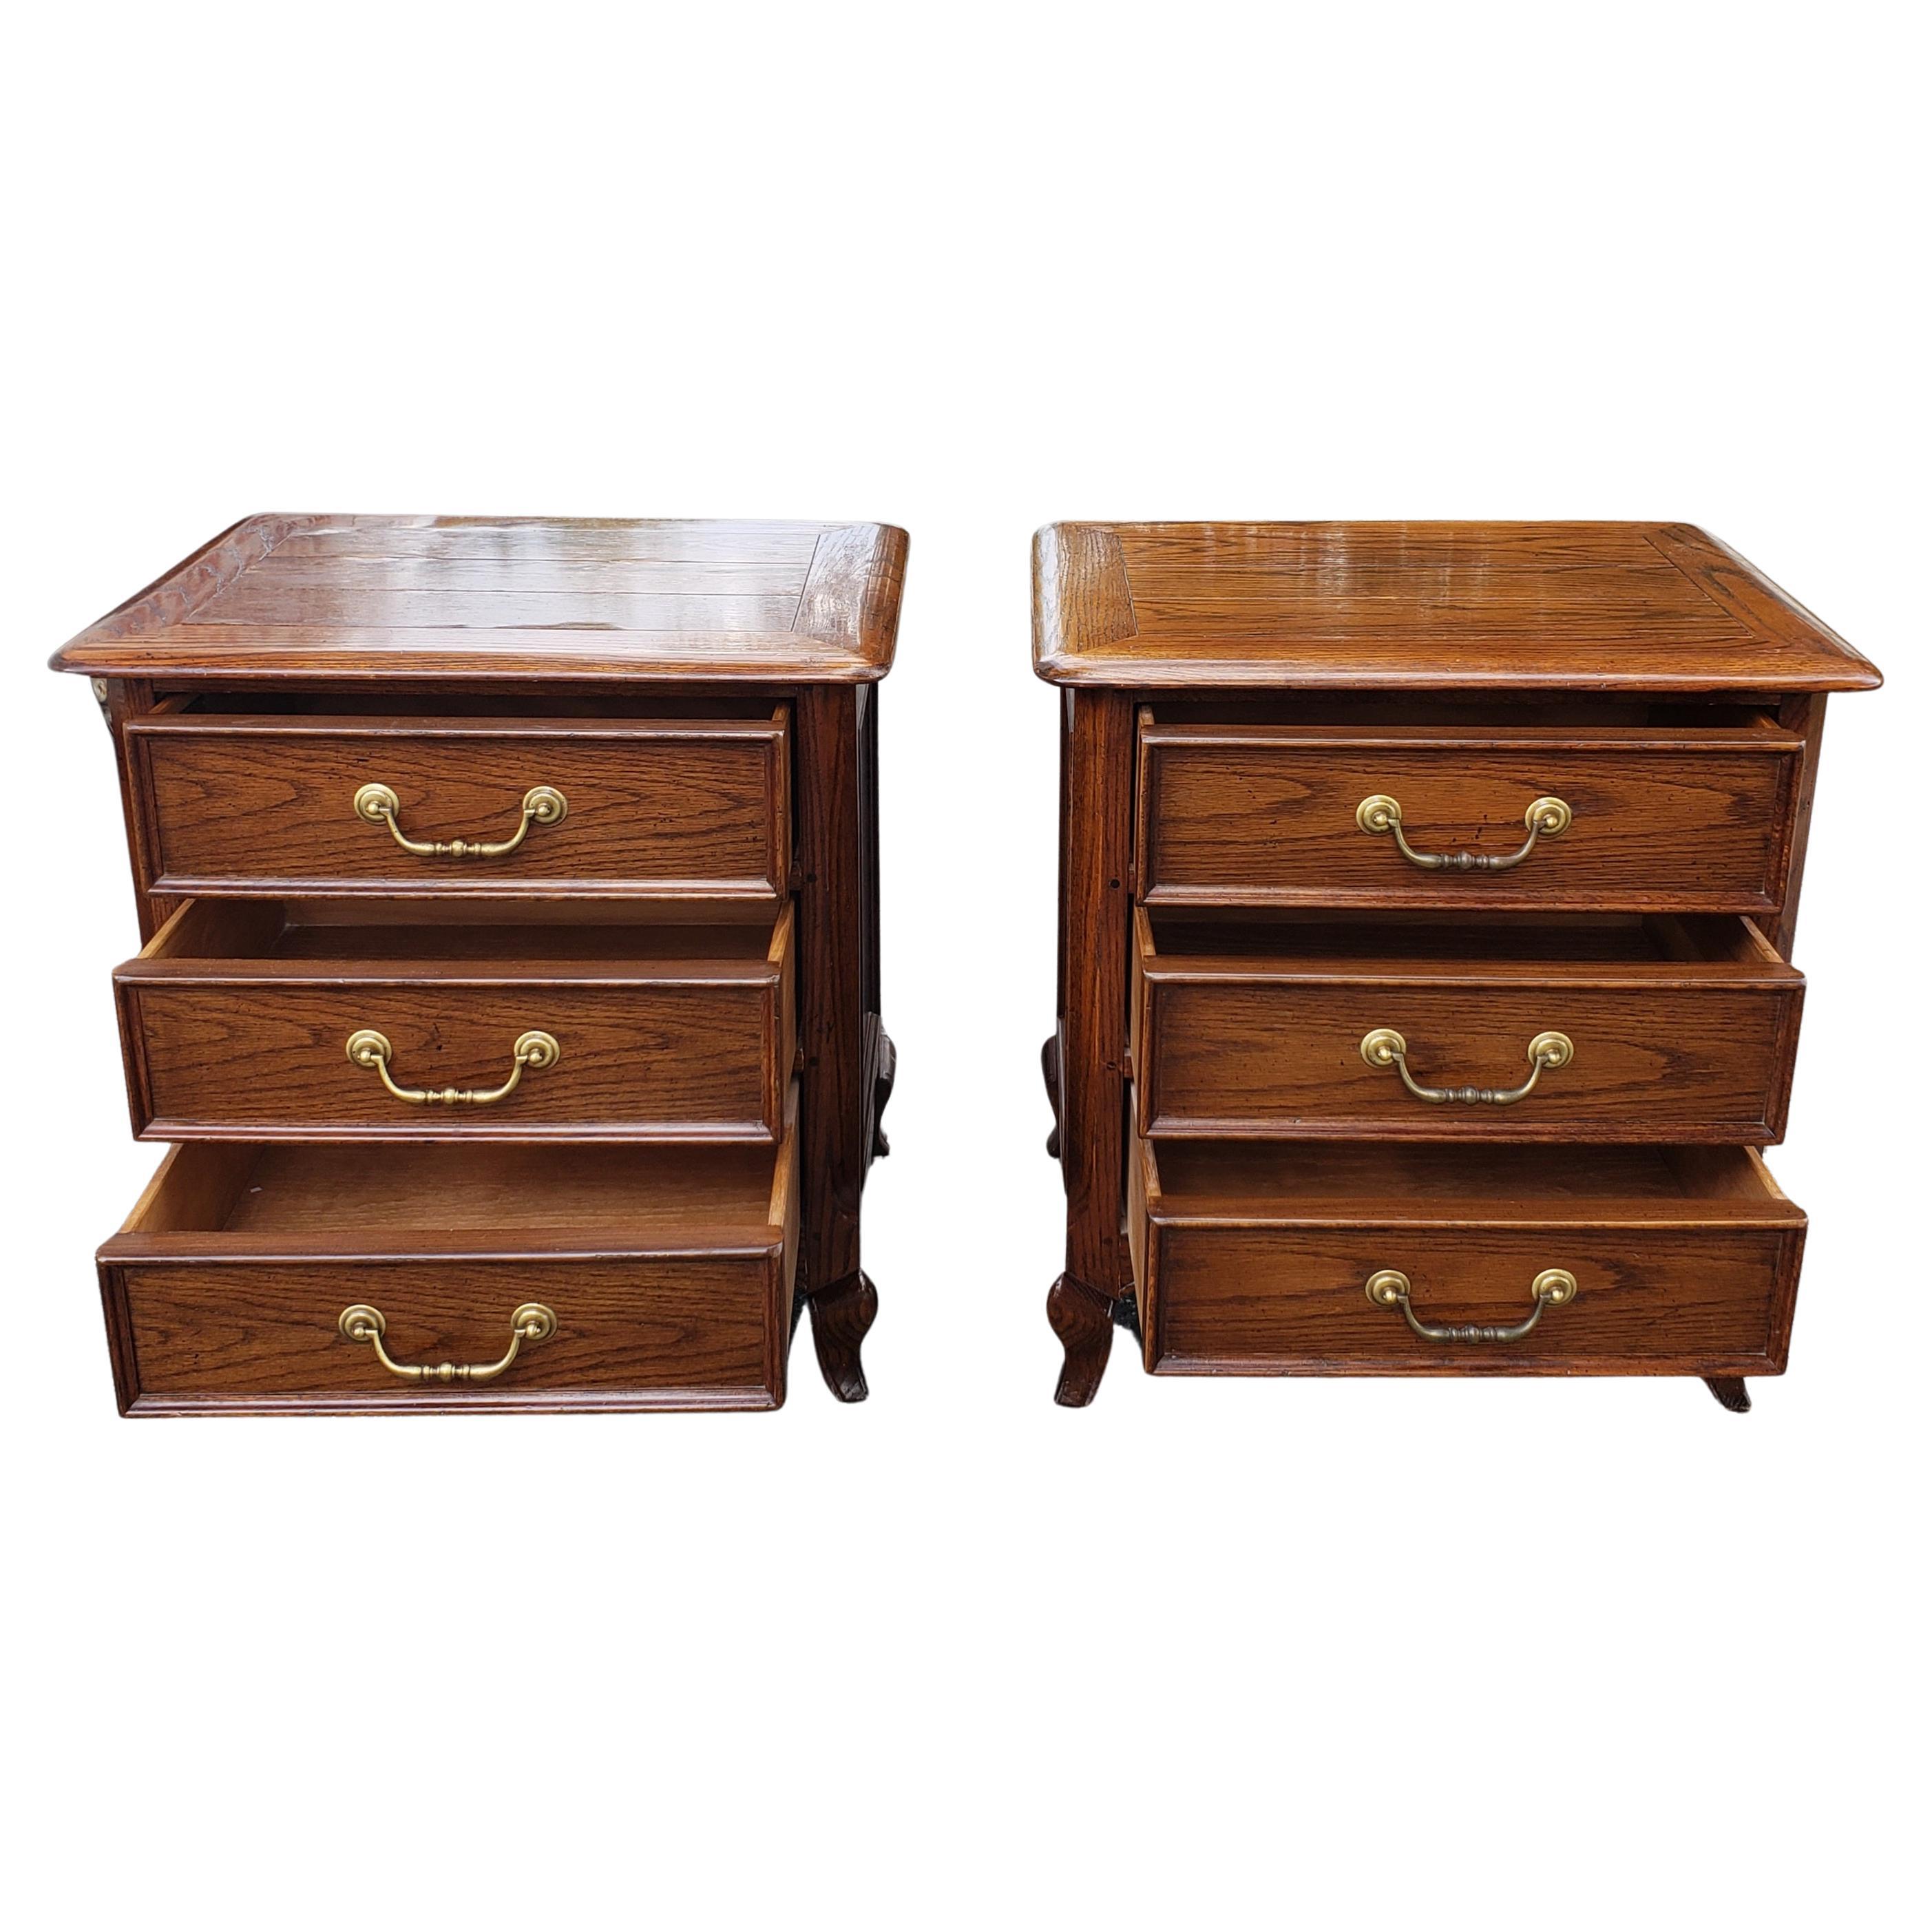 Brass Century Furniture French Country Oak Bedside Chests of Drawers Nighstands, Pair